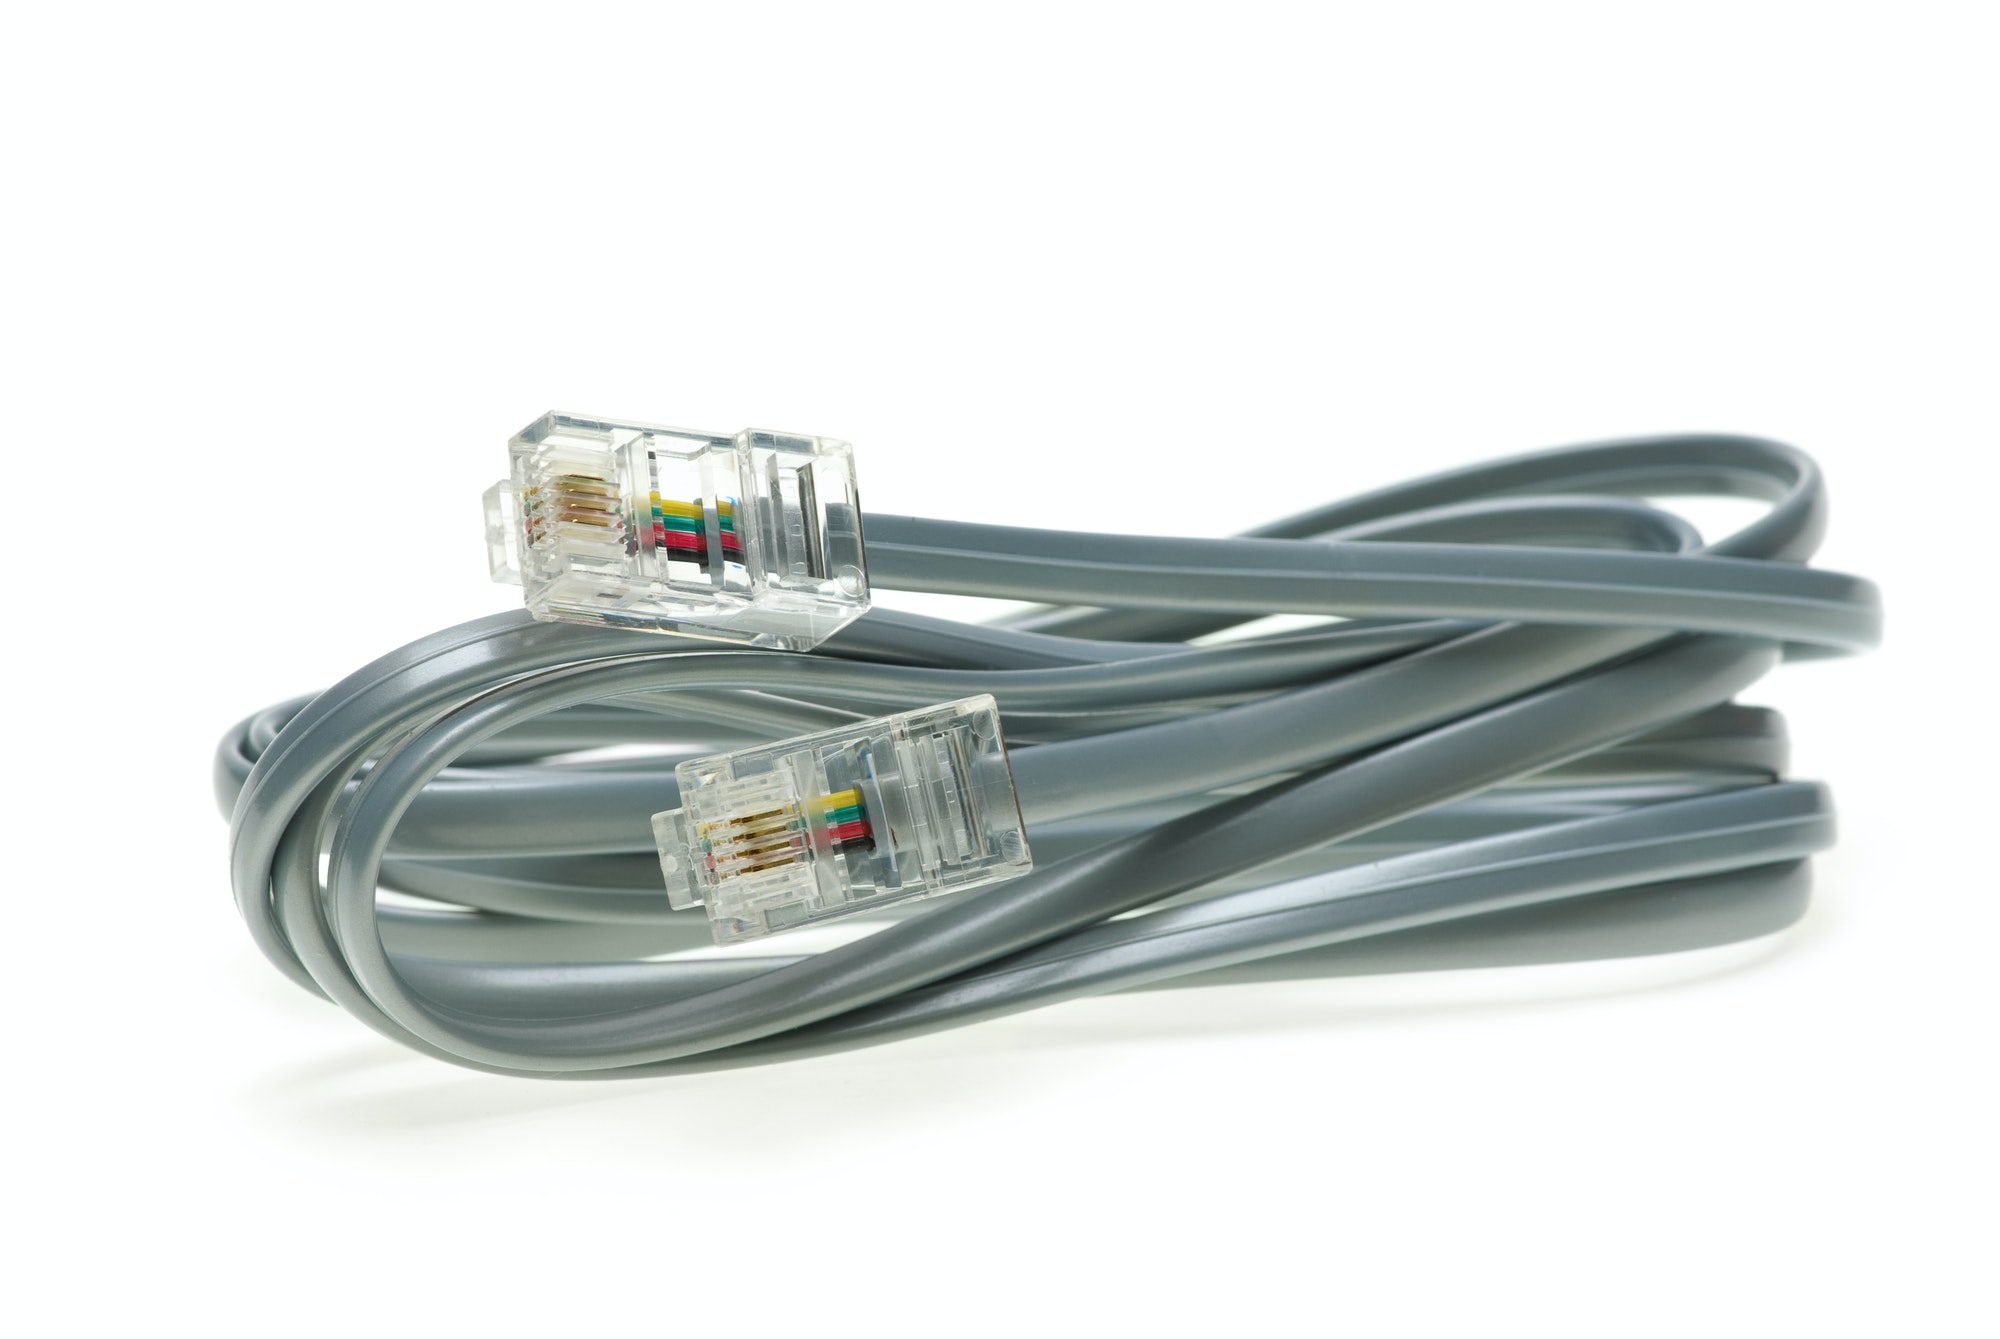 ISDN phone cable